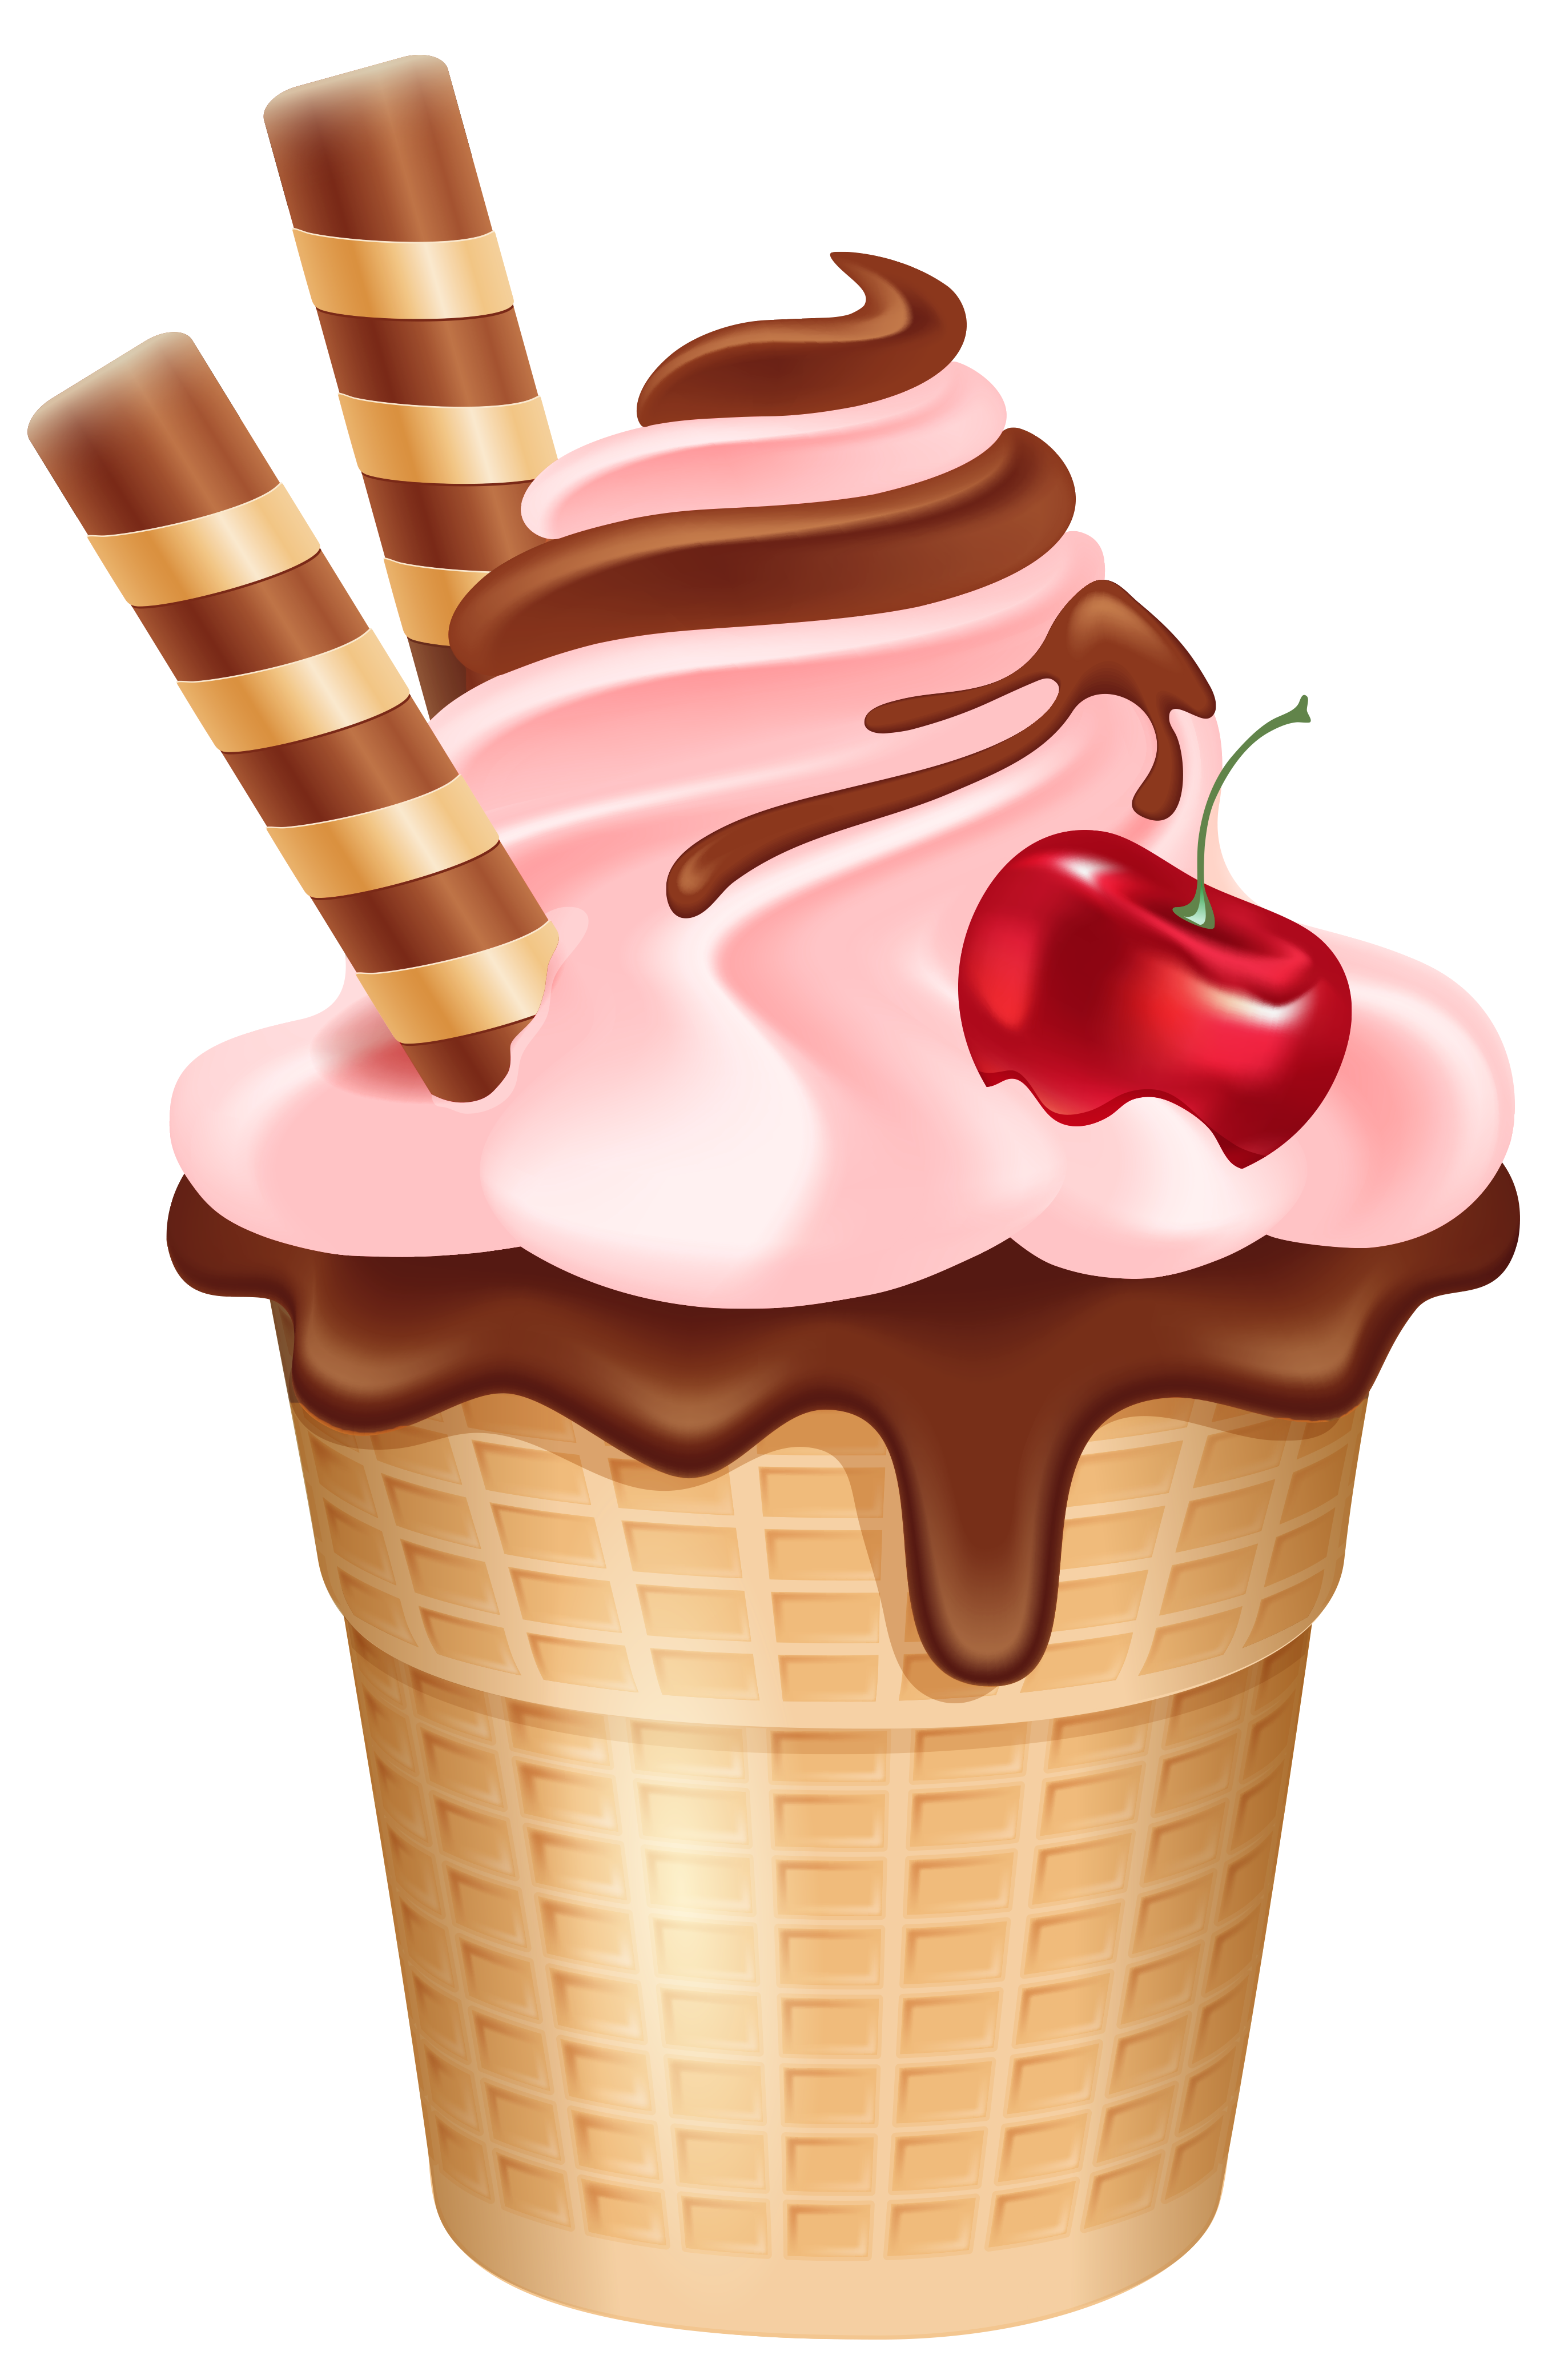 Eating Ice Cup Surface Cake PNG